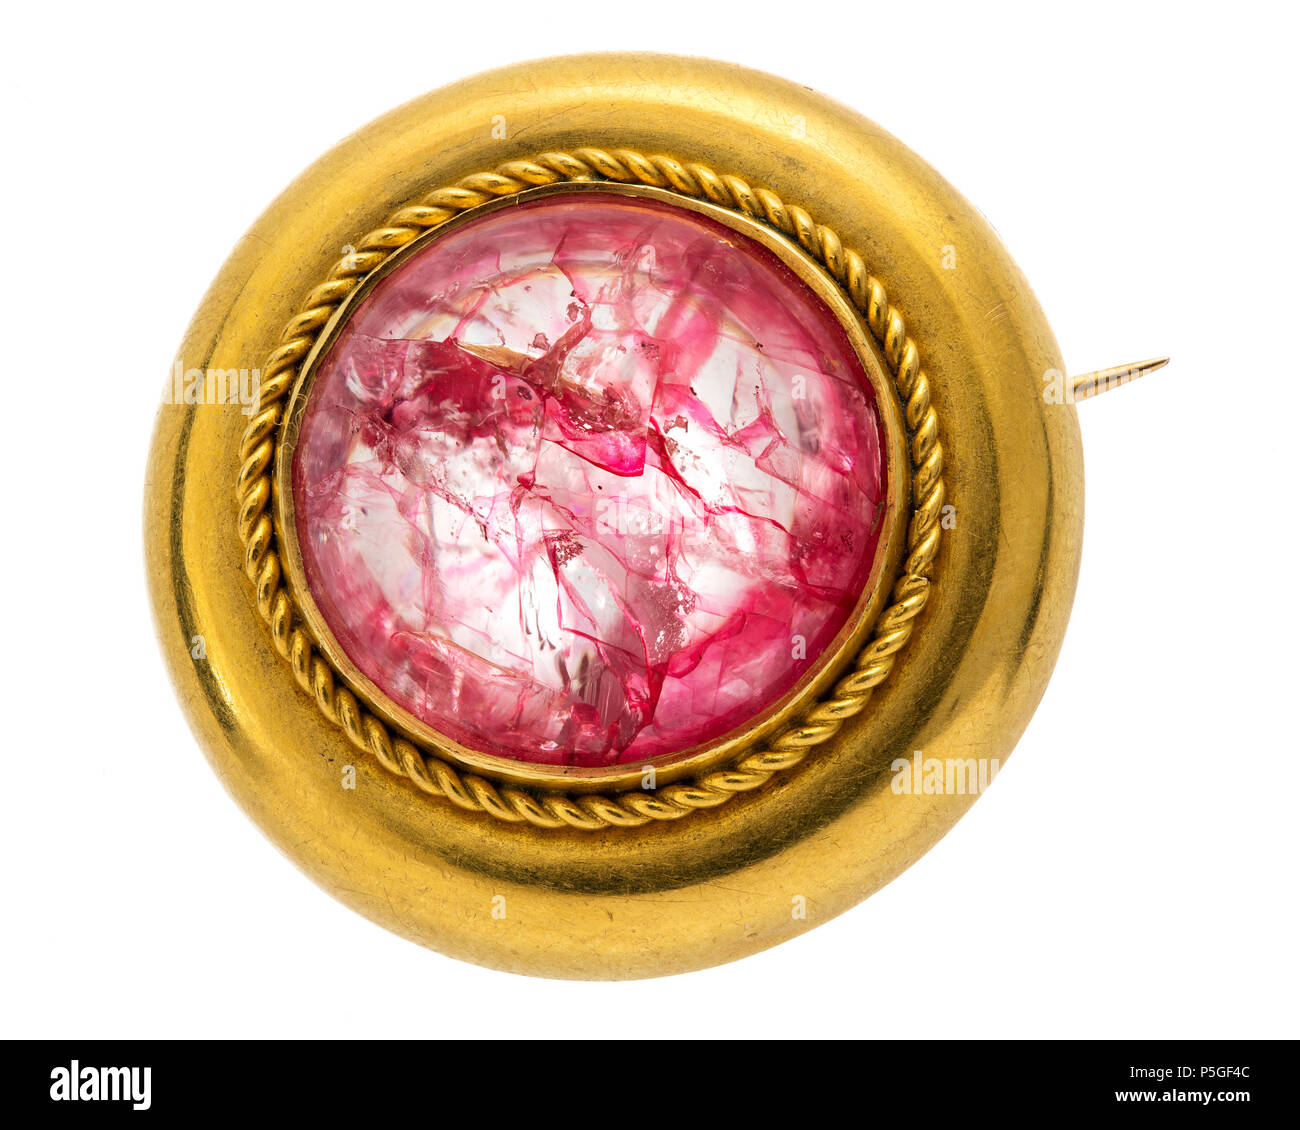 Page 2 - Har Pa Re High Resolution Stock Photography and Images - Alamy